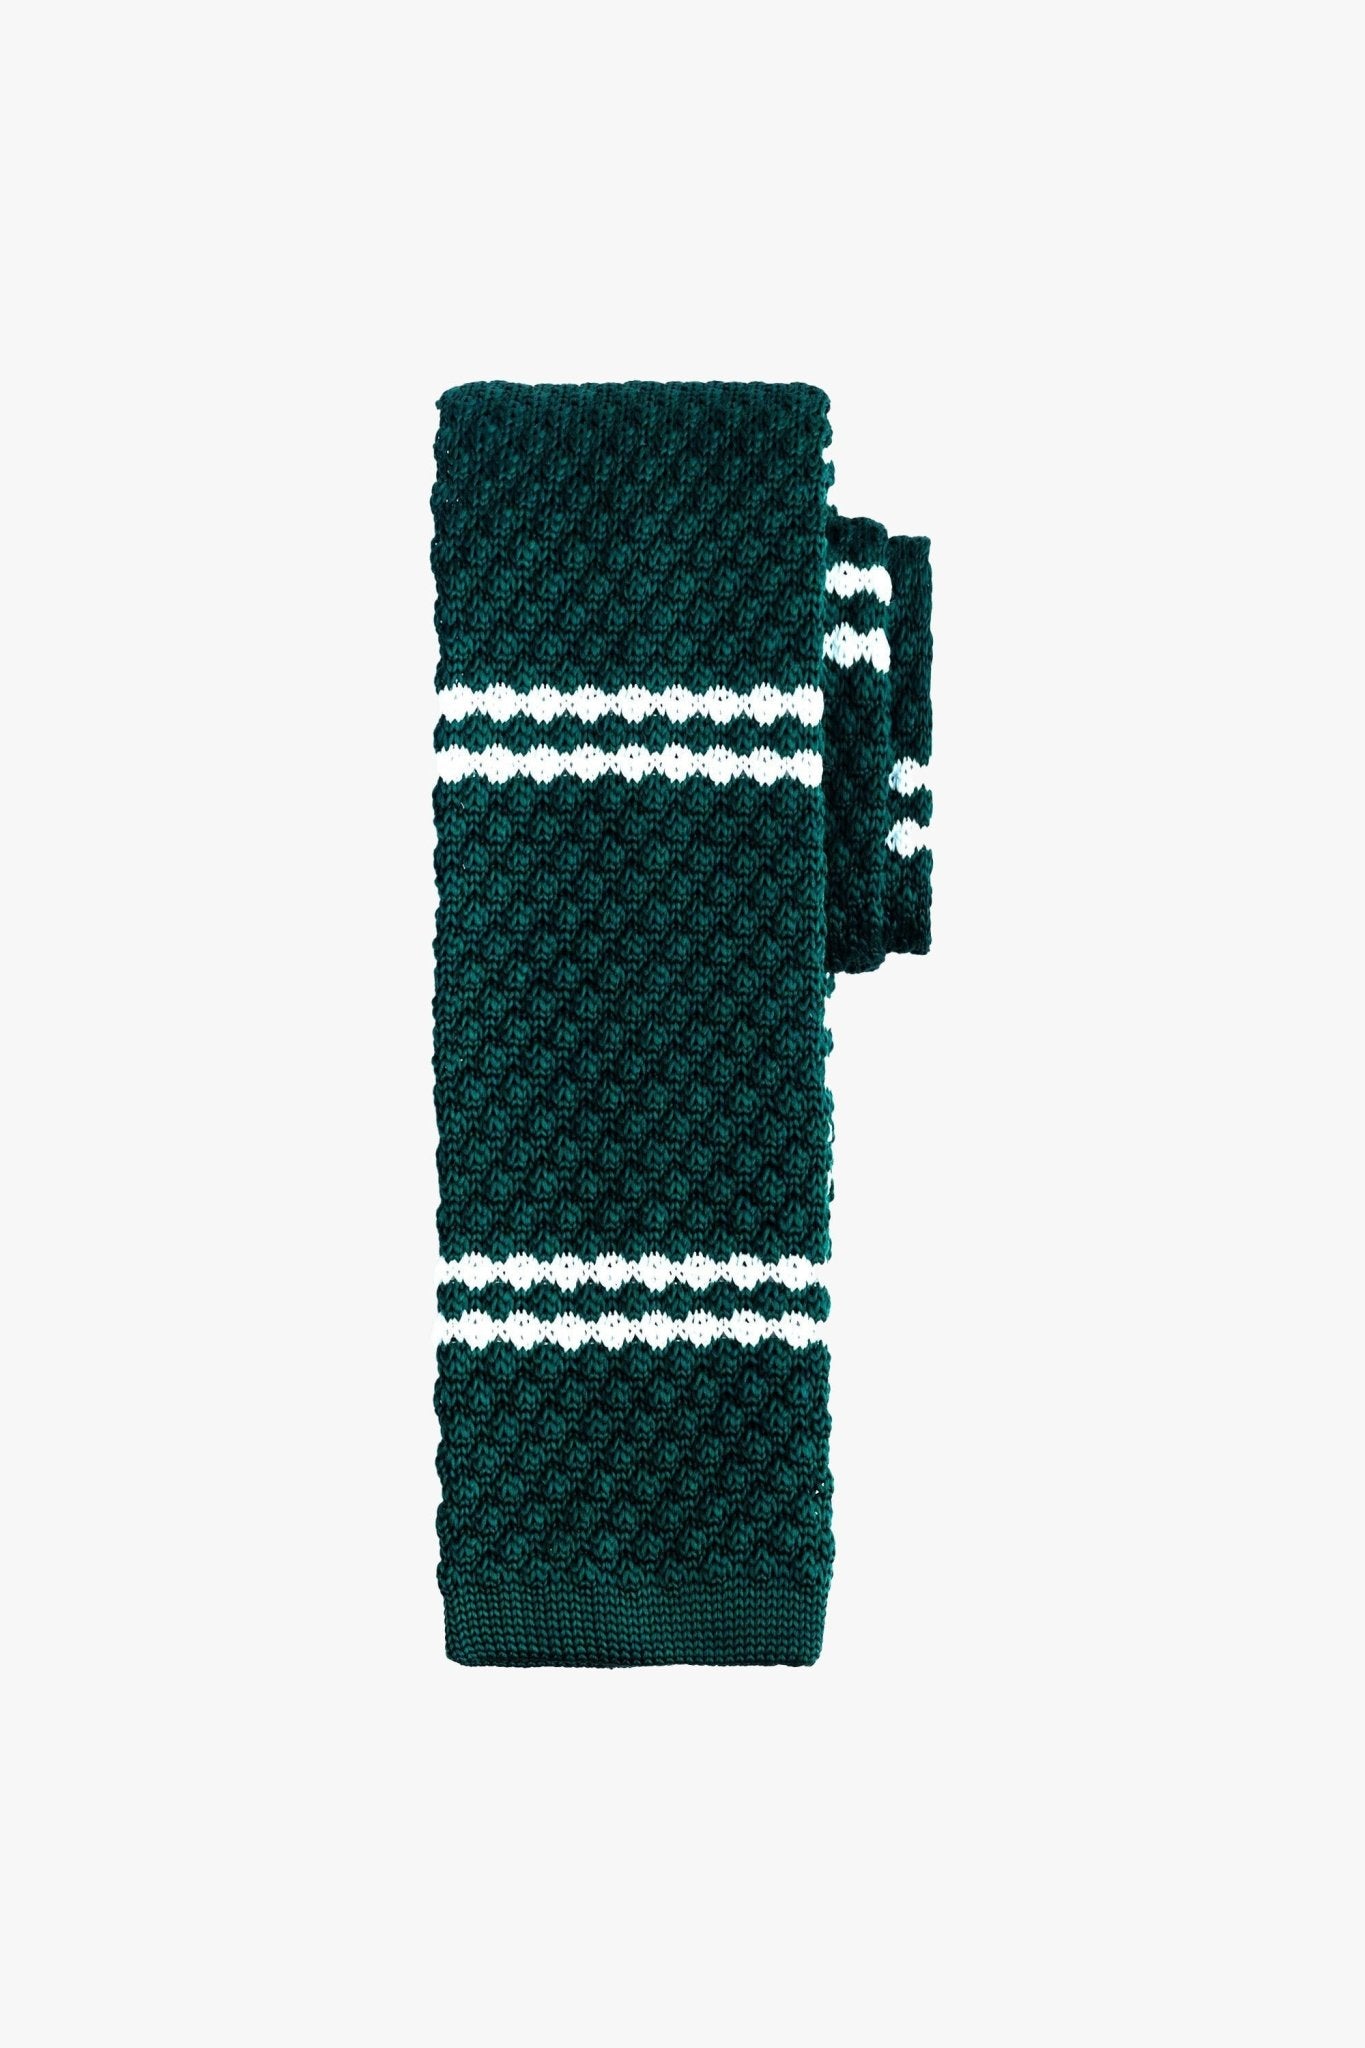 Green Stripe Knitted Tie - My Suited Life